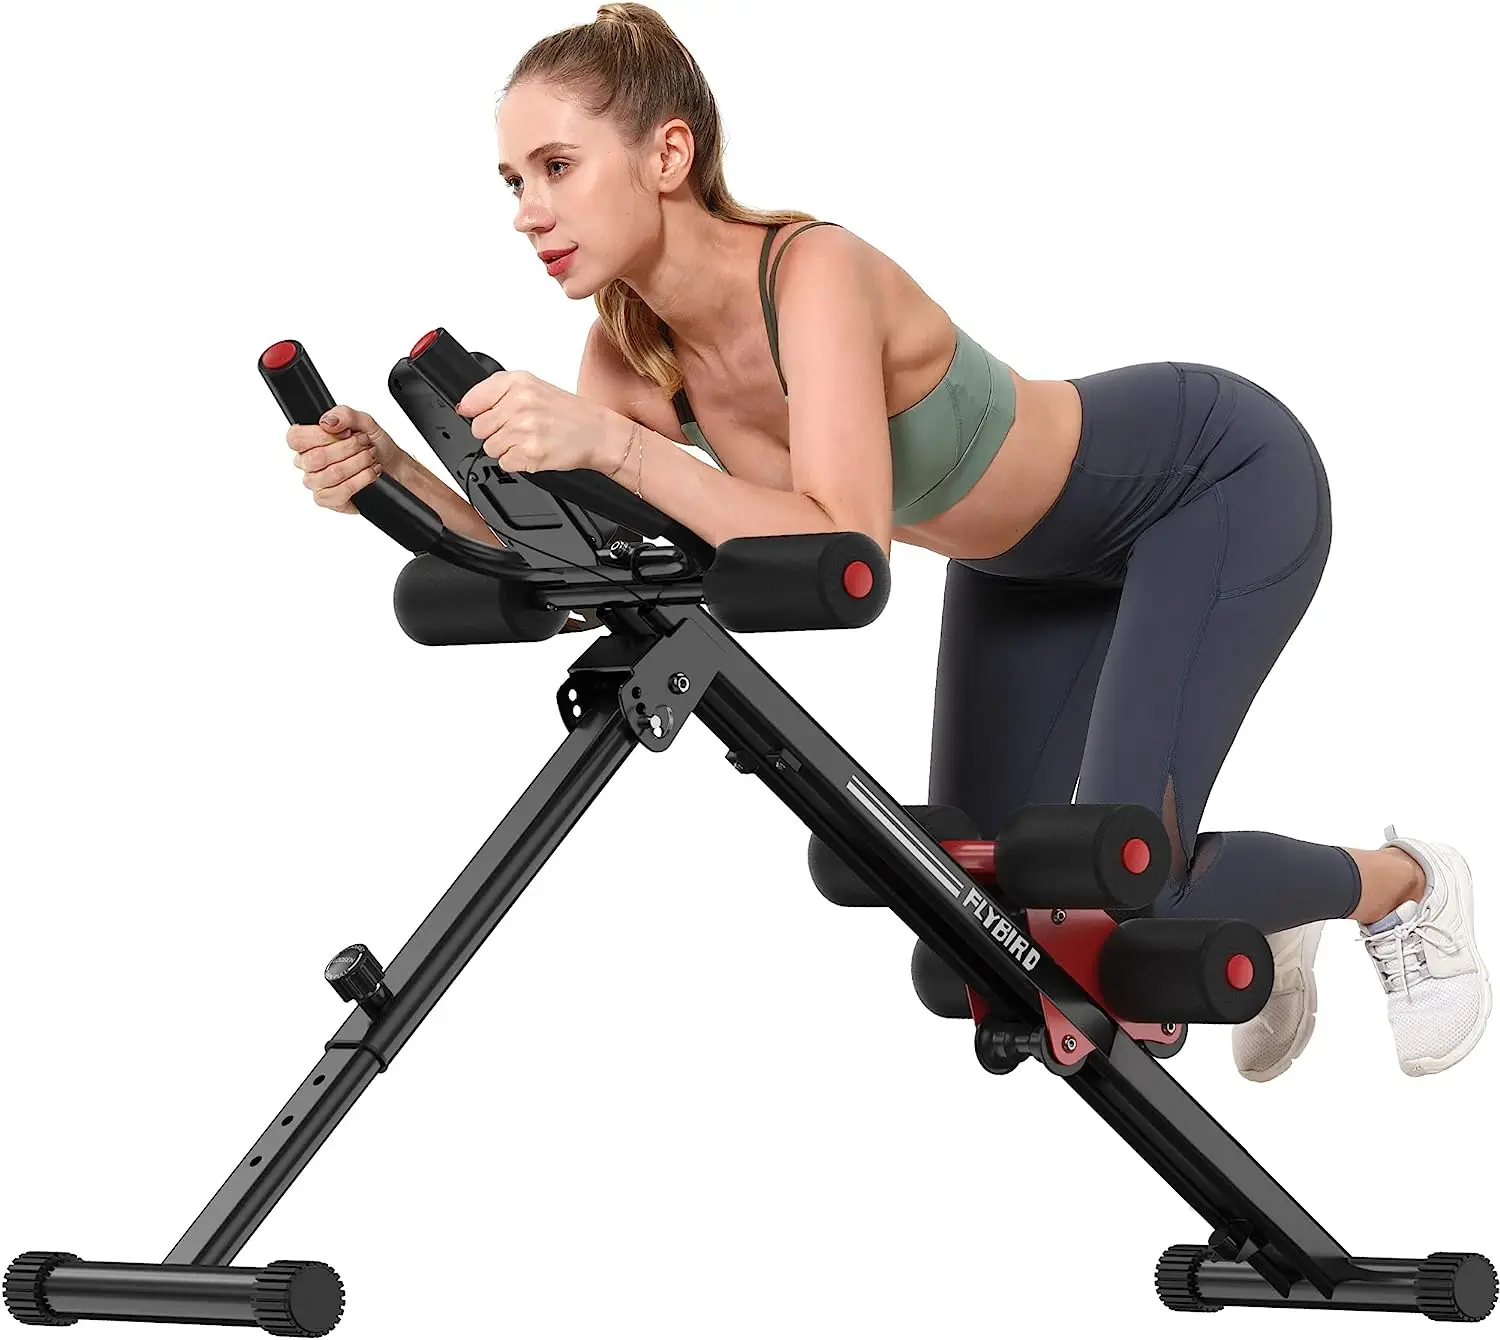 

Workout Equipment, Adjustable Ab Machine Full Body Workout for Home Gym, Strength Training Exercise Equipment for Body Shaping F